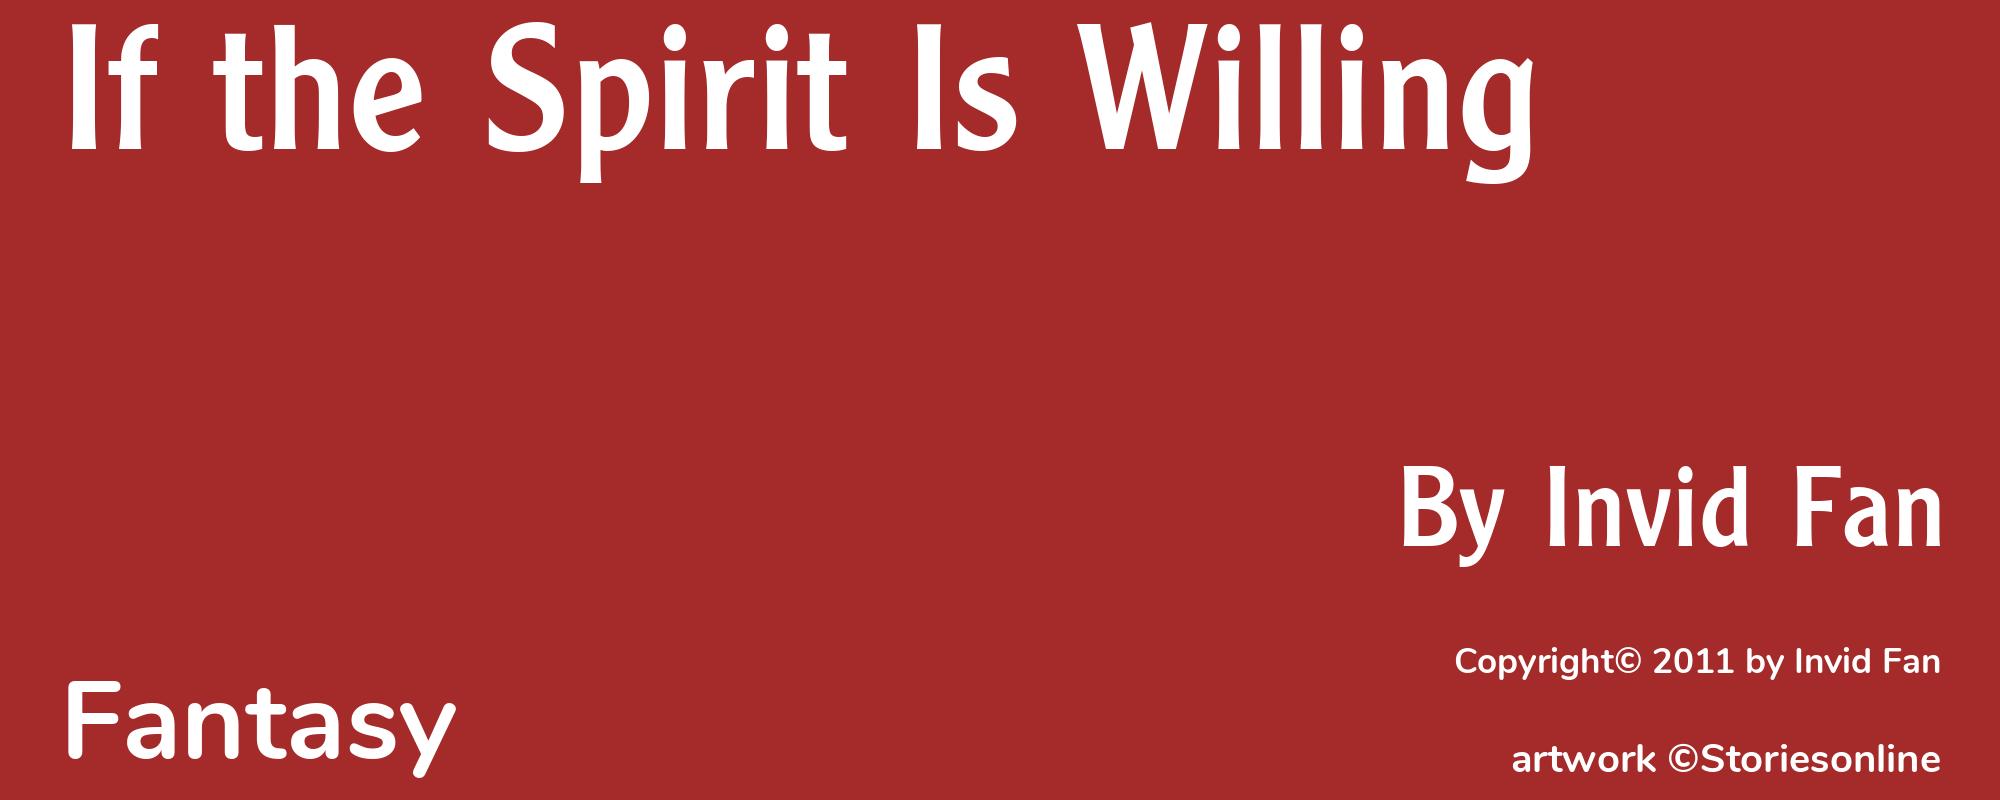 If the Spirit Is Willing - Cover